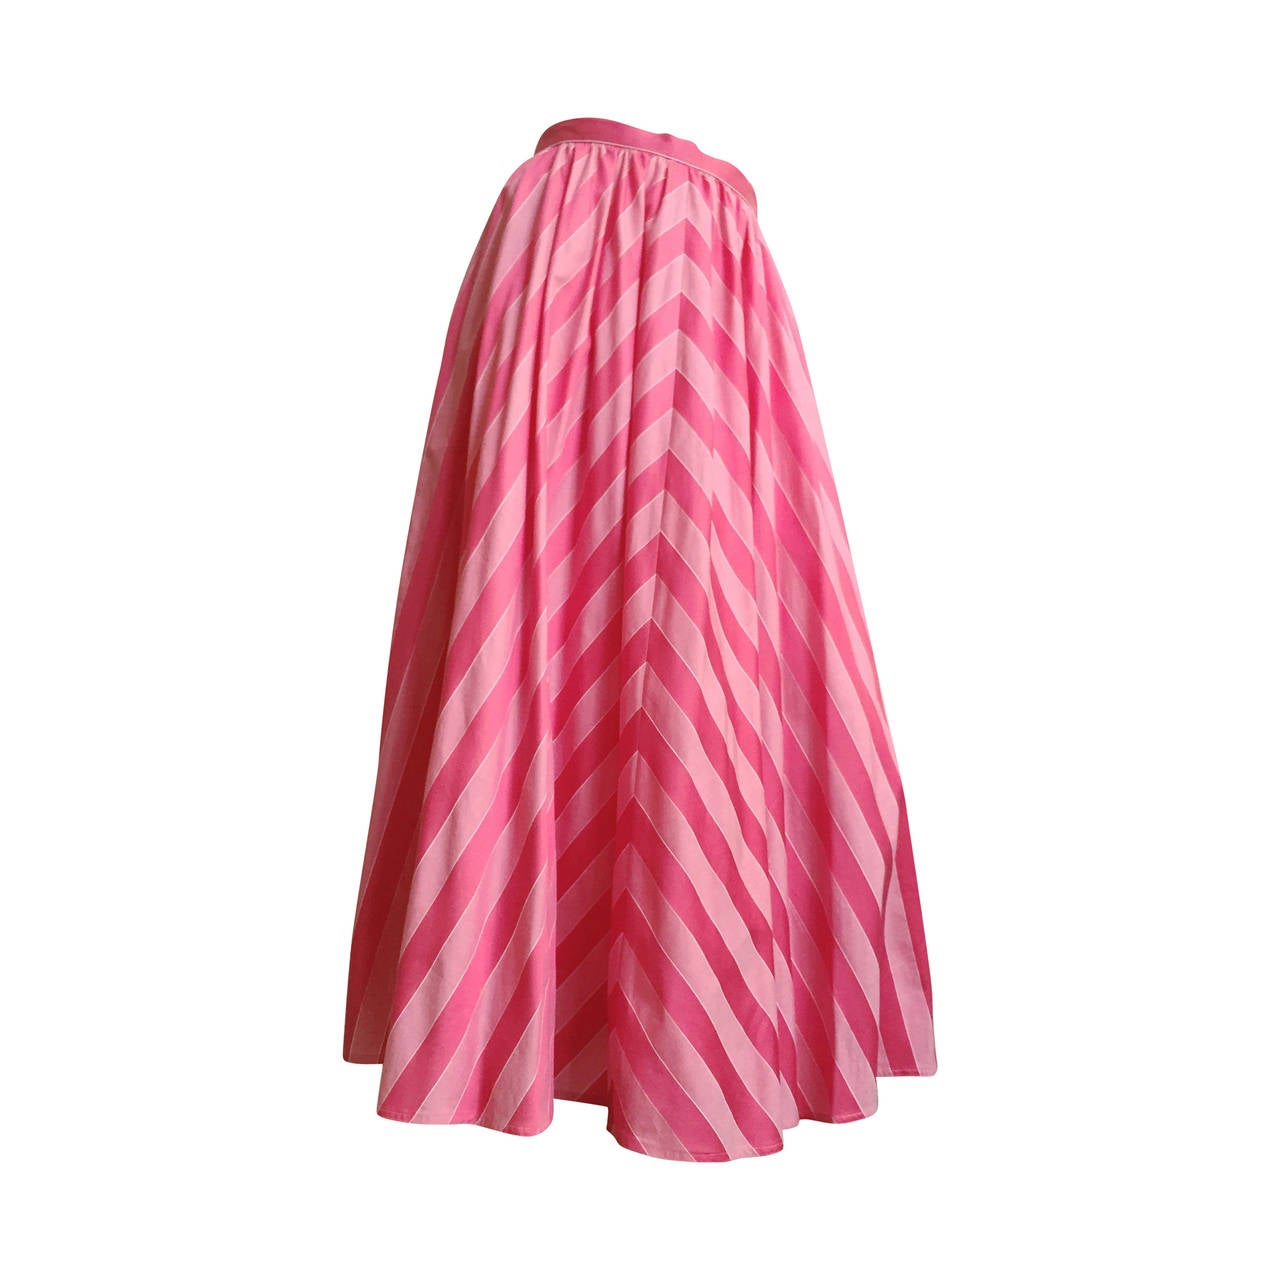 Adele Simpson for Saks Fifth Avenue 80s pink cotton skirt with pockets size 6.